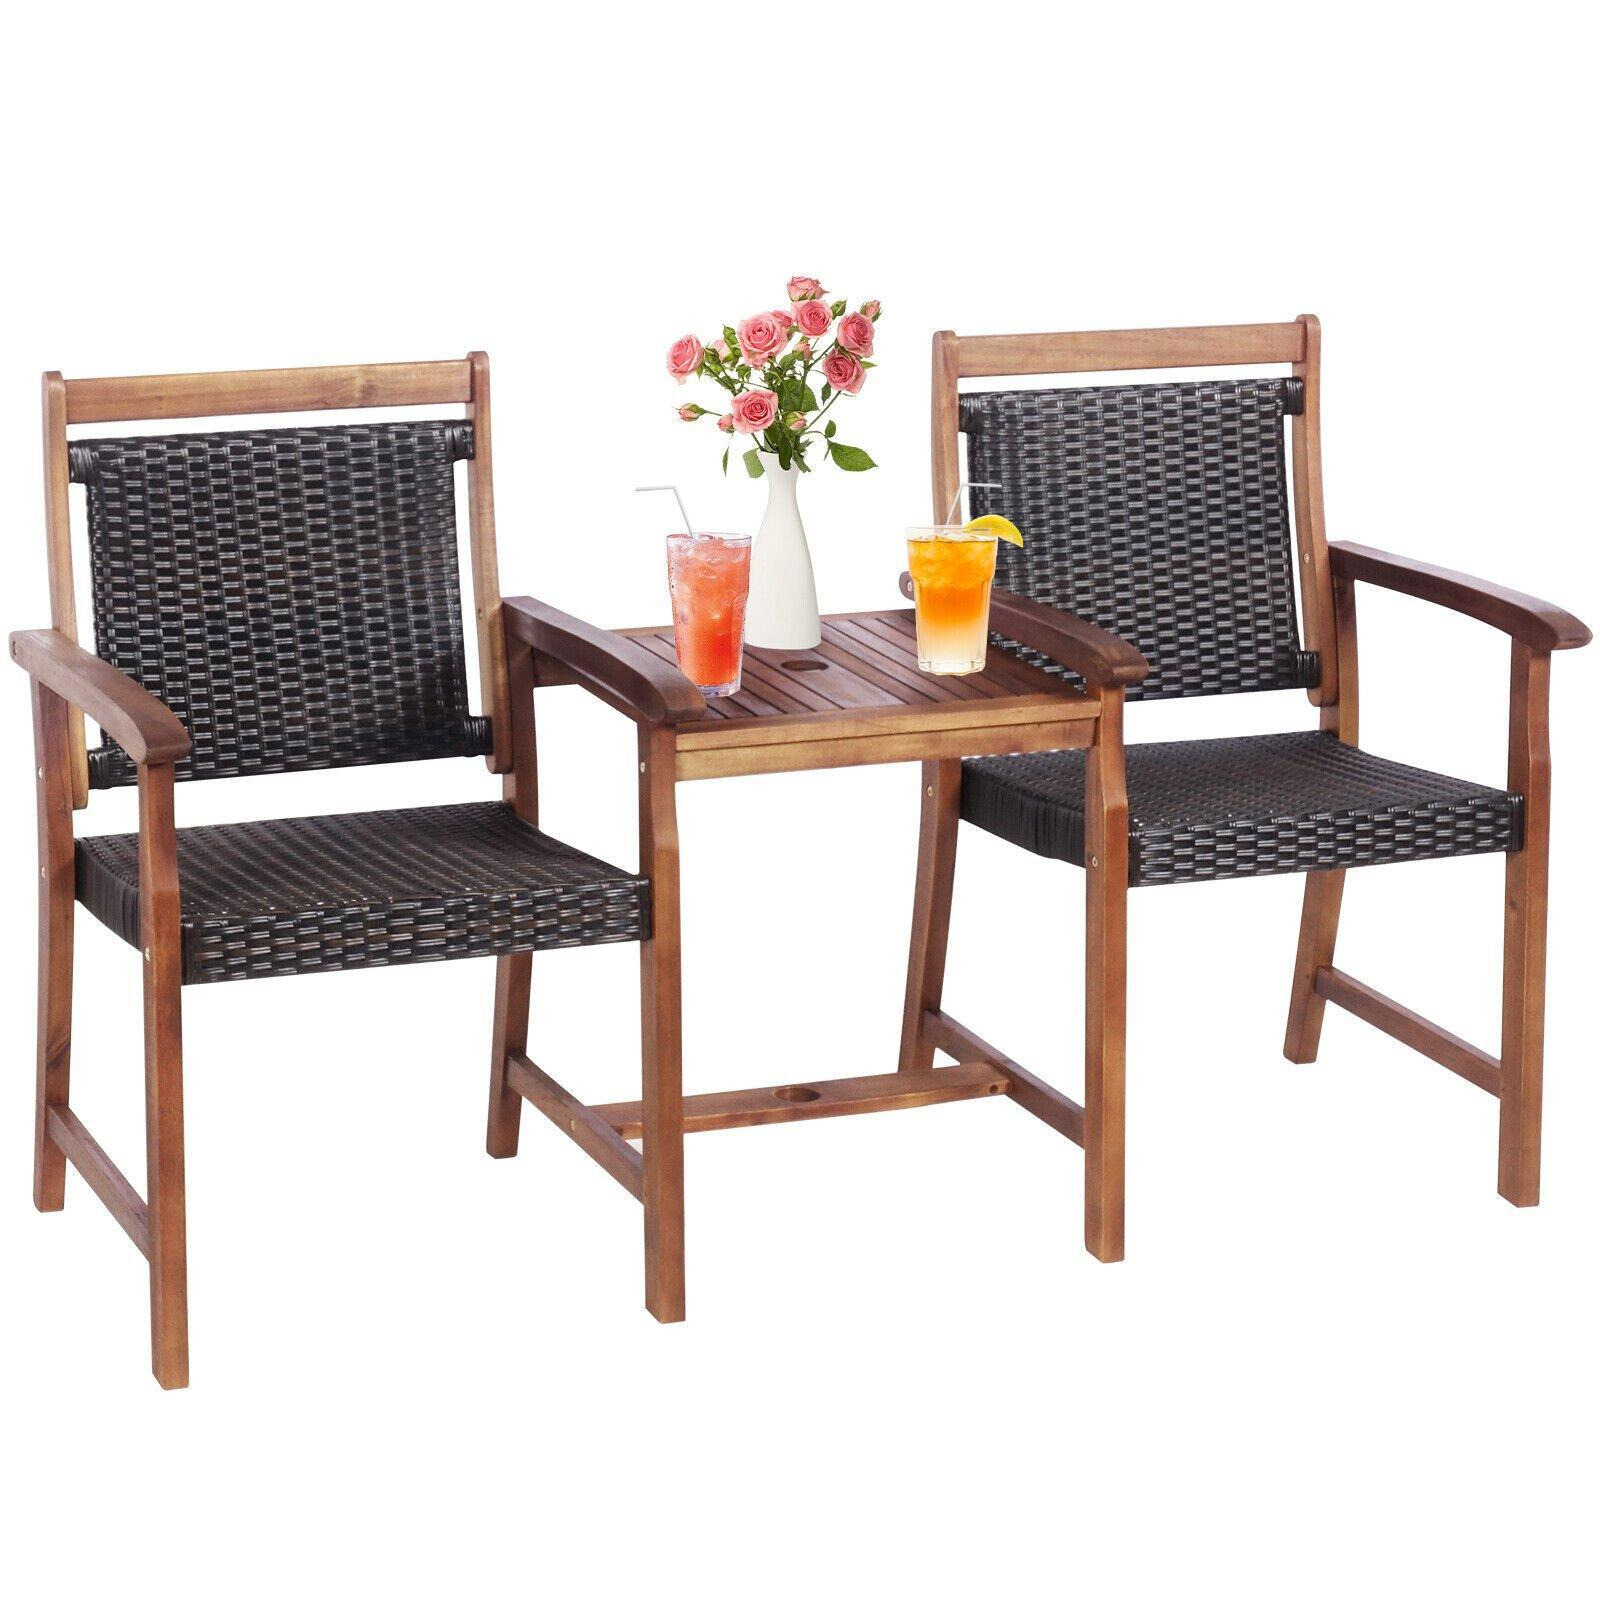 Outdoor Twin Patio Chairs Conversation Furniture Set 2-Seater Garden Loveseat with Coffee Table and Umbrella Hole - image 1